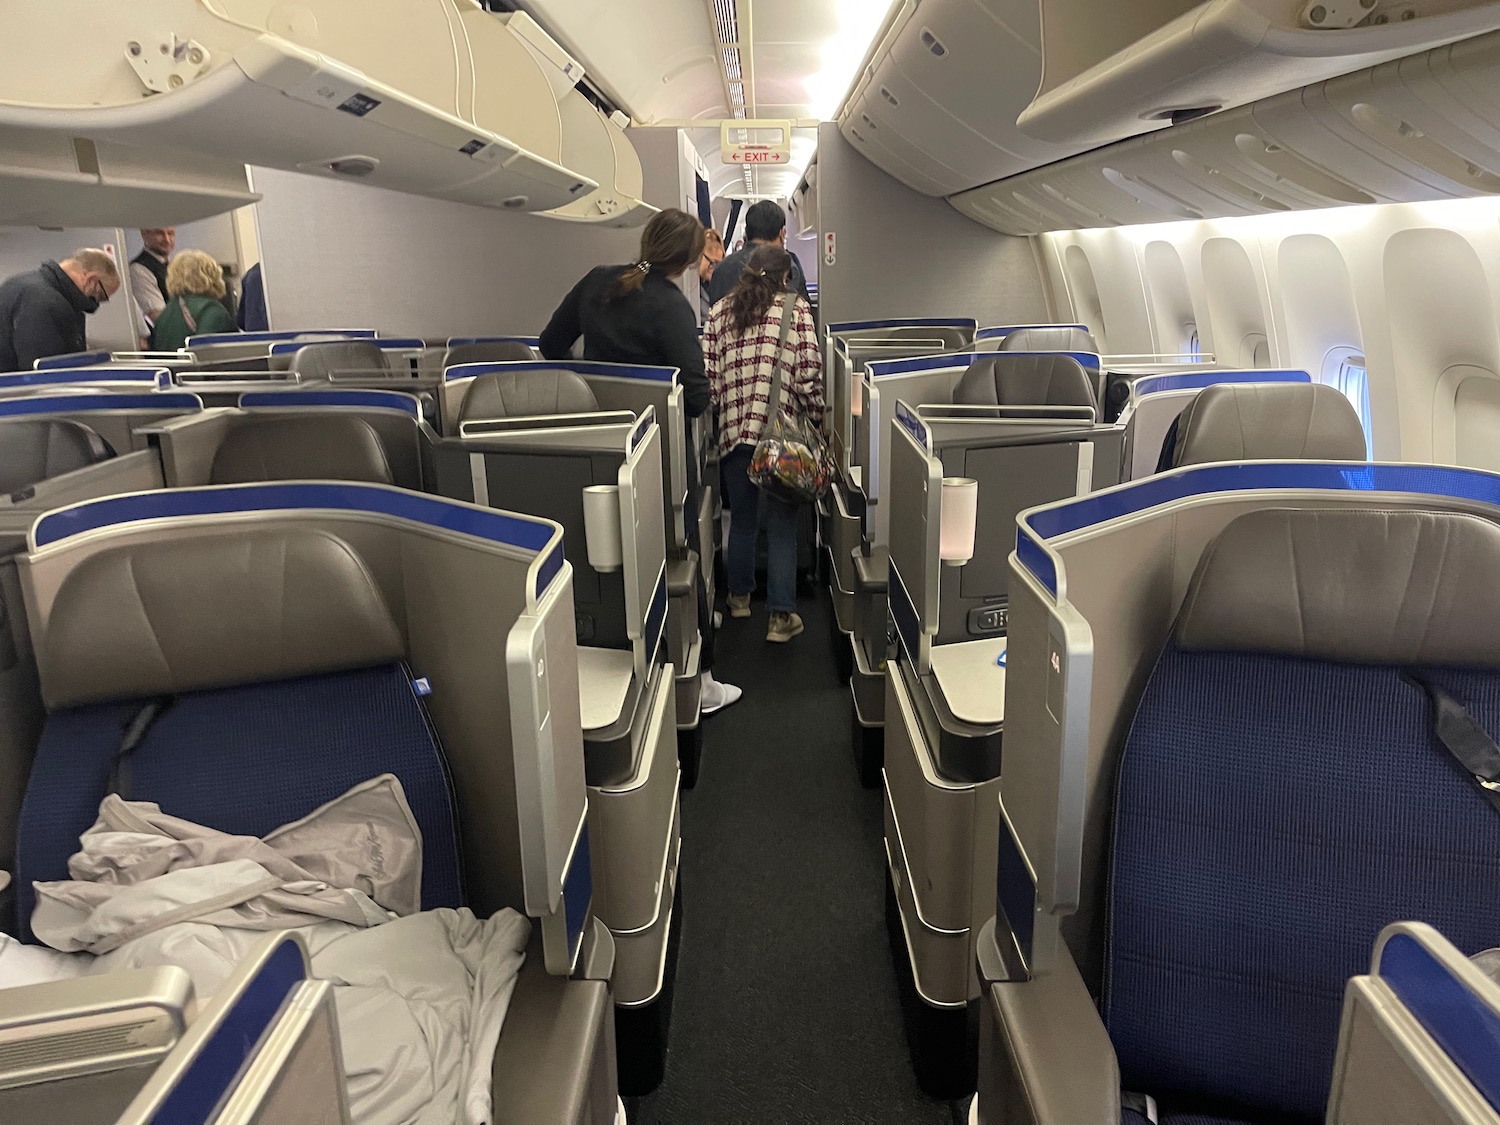 people in an airplane with seats and people walking